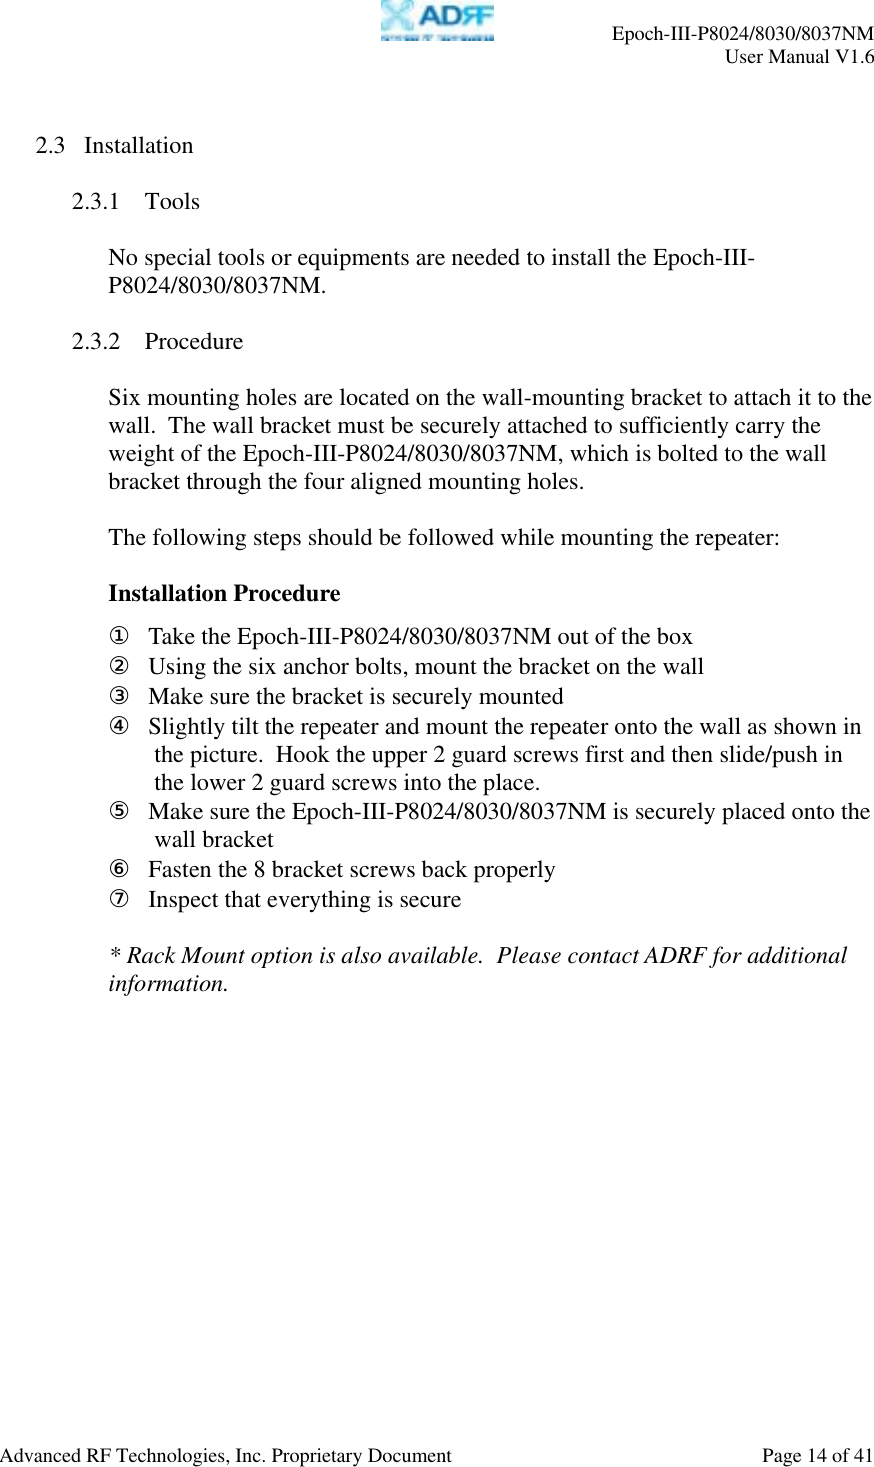     Epoch-III-P8024/8030/8037NM  User Manual V1.6  Advanced RF Technologies, Inc. Proprietary Document  Page 14 of 41   2.3 Installation  2.3.1 Tools  No special tools or equipments are needed to install the Epoch-III-P8024/8030/8037NM.  2.3.2 Procedure  Six mounting holes are located on the wall-mounting bracket to attach it to the wall.  The wall bracket must be securely attached to sufficiently carry the weight of the Epoch-III-P8024/8030/8037NM, which is bolted to the wall bracket through the four aligned mounting holes.   The following steps should be followed while mounting the repeater:  Installation Procedure ① Take the Epoch-III-P8024/8030/8037NM out of the box ② Using the six anchor bolts, mount the bracket on the wall ③ Make sure the bracket is securely mounted ④ Slightly tilt the repeater and mount the repeater onto the wall as shown in the picture.  Hook the upper 2 guard screws first and then slide/push in the lower 2 guard screws into the place. ⑤ Make sure the Epoch-III-P8024/8030/8037NM is securely placed onto the wall bracket ⑥ Fasten the 8 bracket screws back properly ⑦ Inspect that everything is secure  * Rack Mount option is also available.  Please contact ADRF for additional information.  